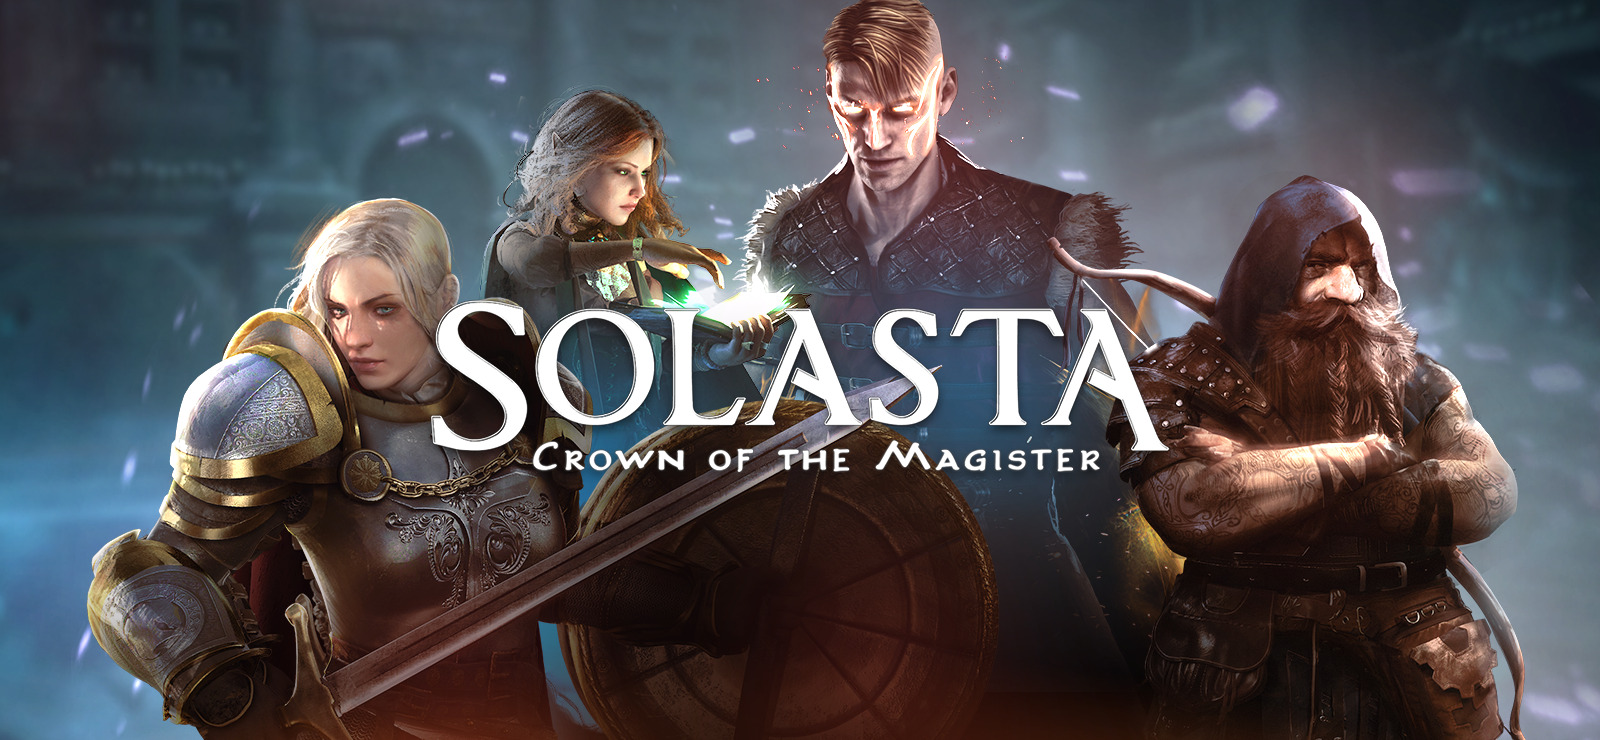 Solasta: Crown Of The Magister 2021 Wallpapers